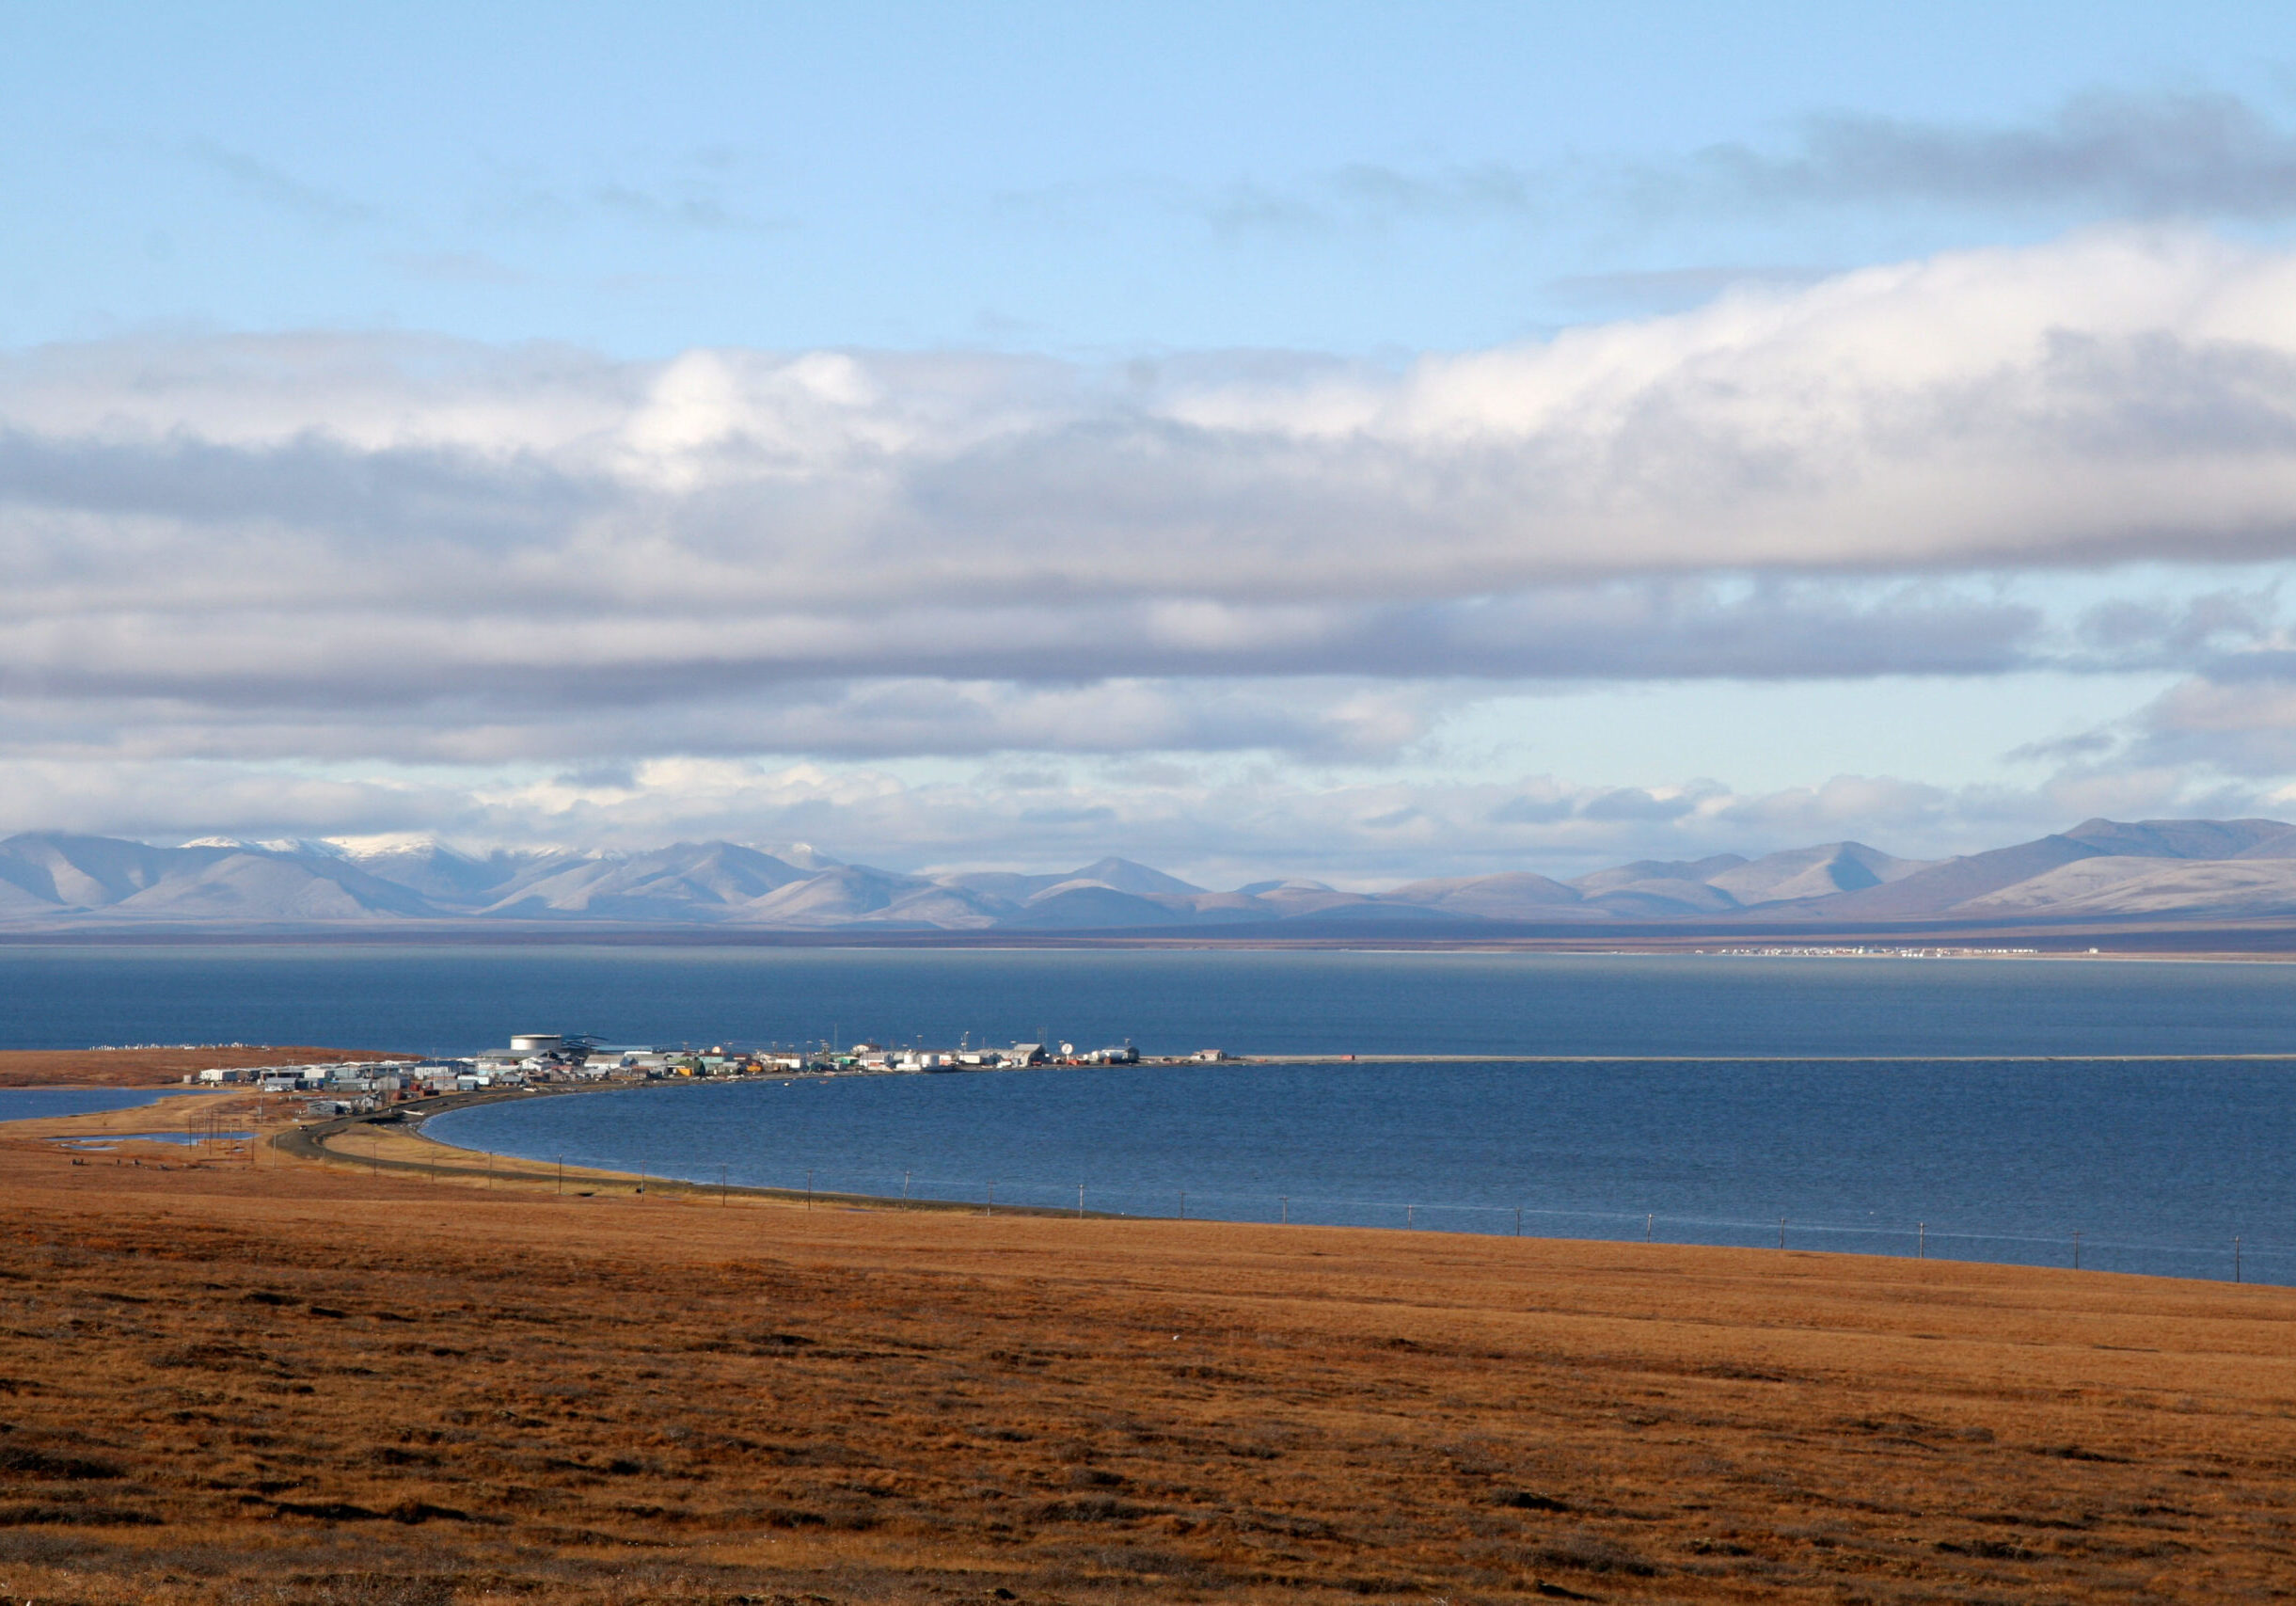 The community of Teller is in the foreground, with Brevig Mission faintly visible across the water. Photo: KNOM File.